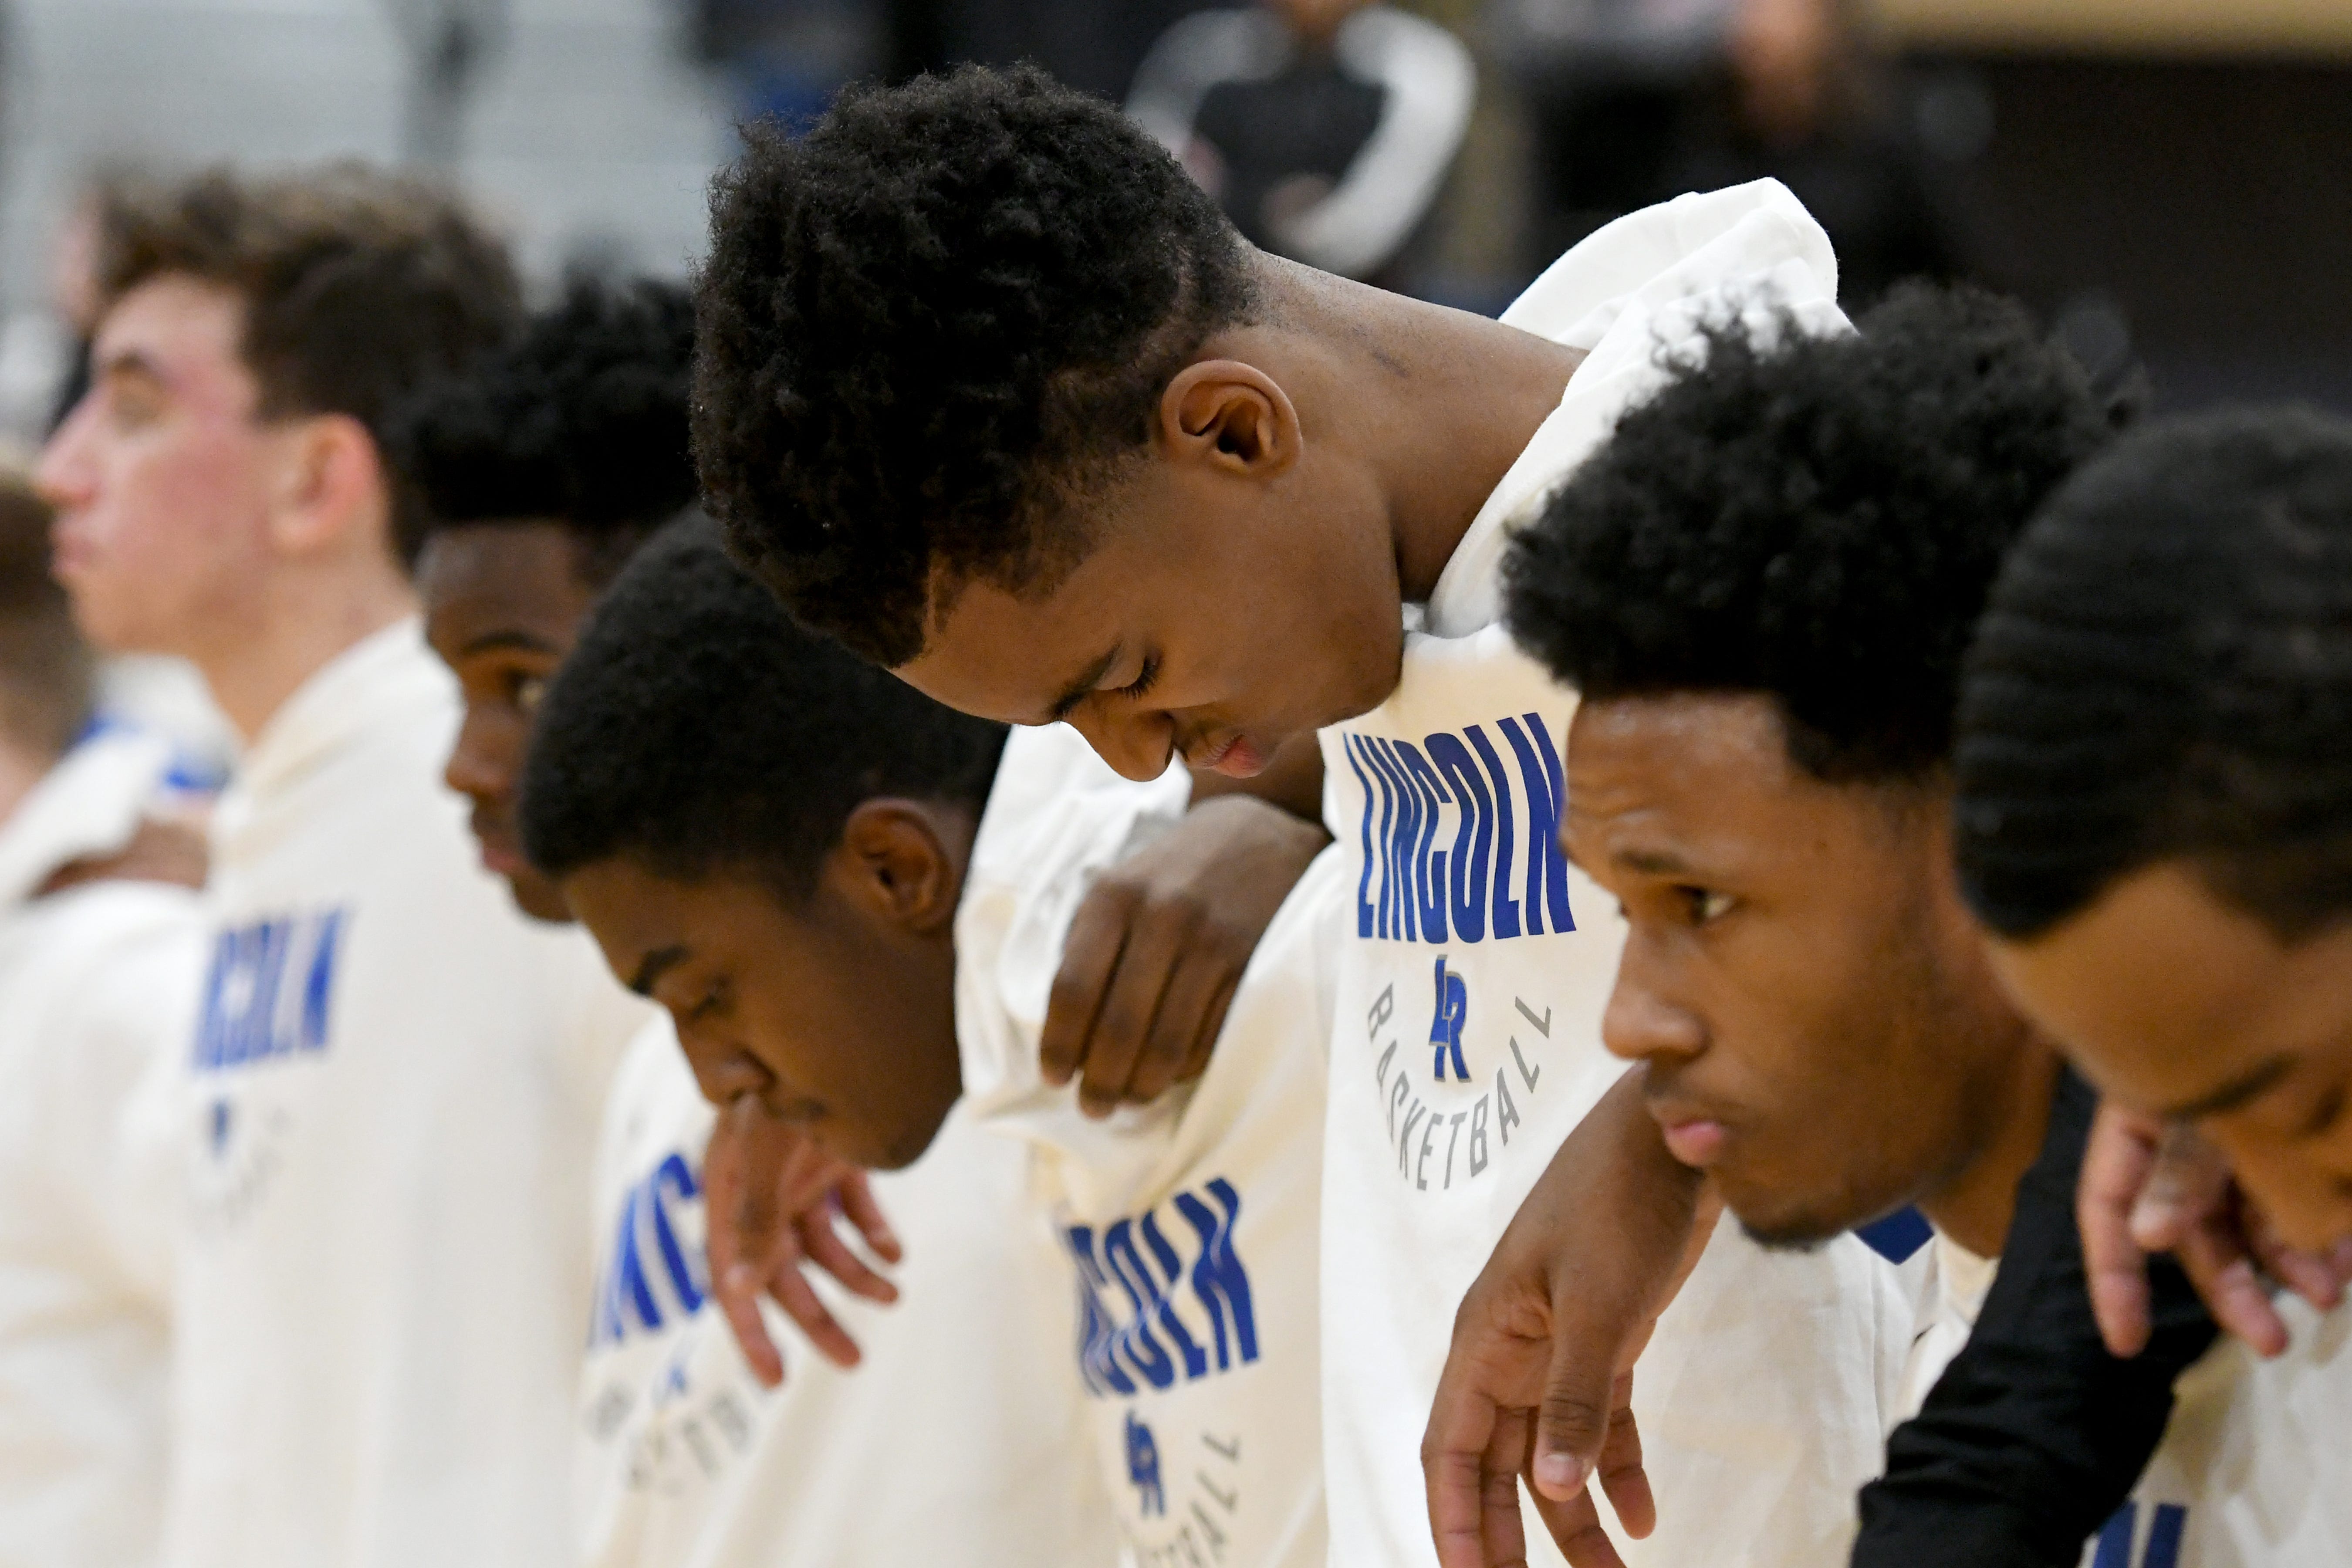 Emoni Bates, center, stands with his teammates during the National Anthem prior to their game against Saline High School.